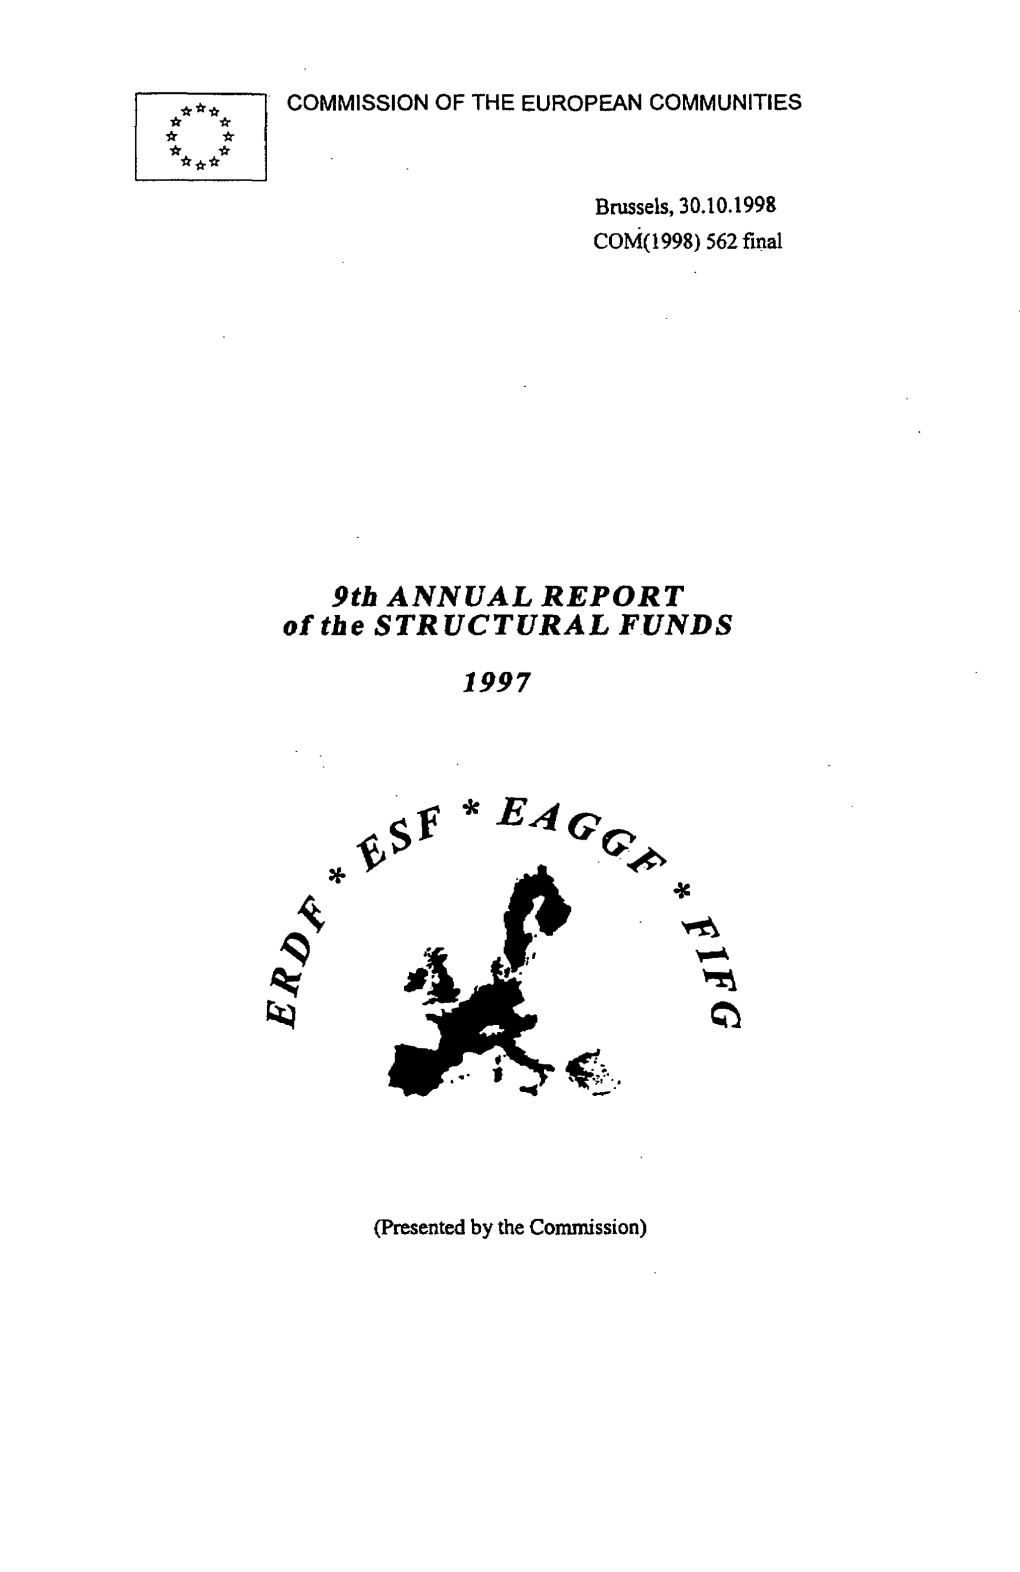 9Th ANNUAL REPORT of the STRUCTURAL FUNDS 1997